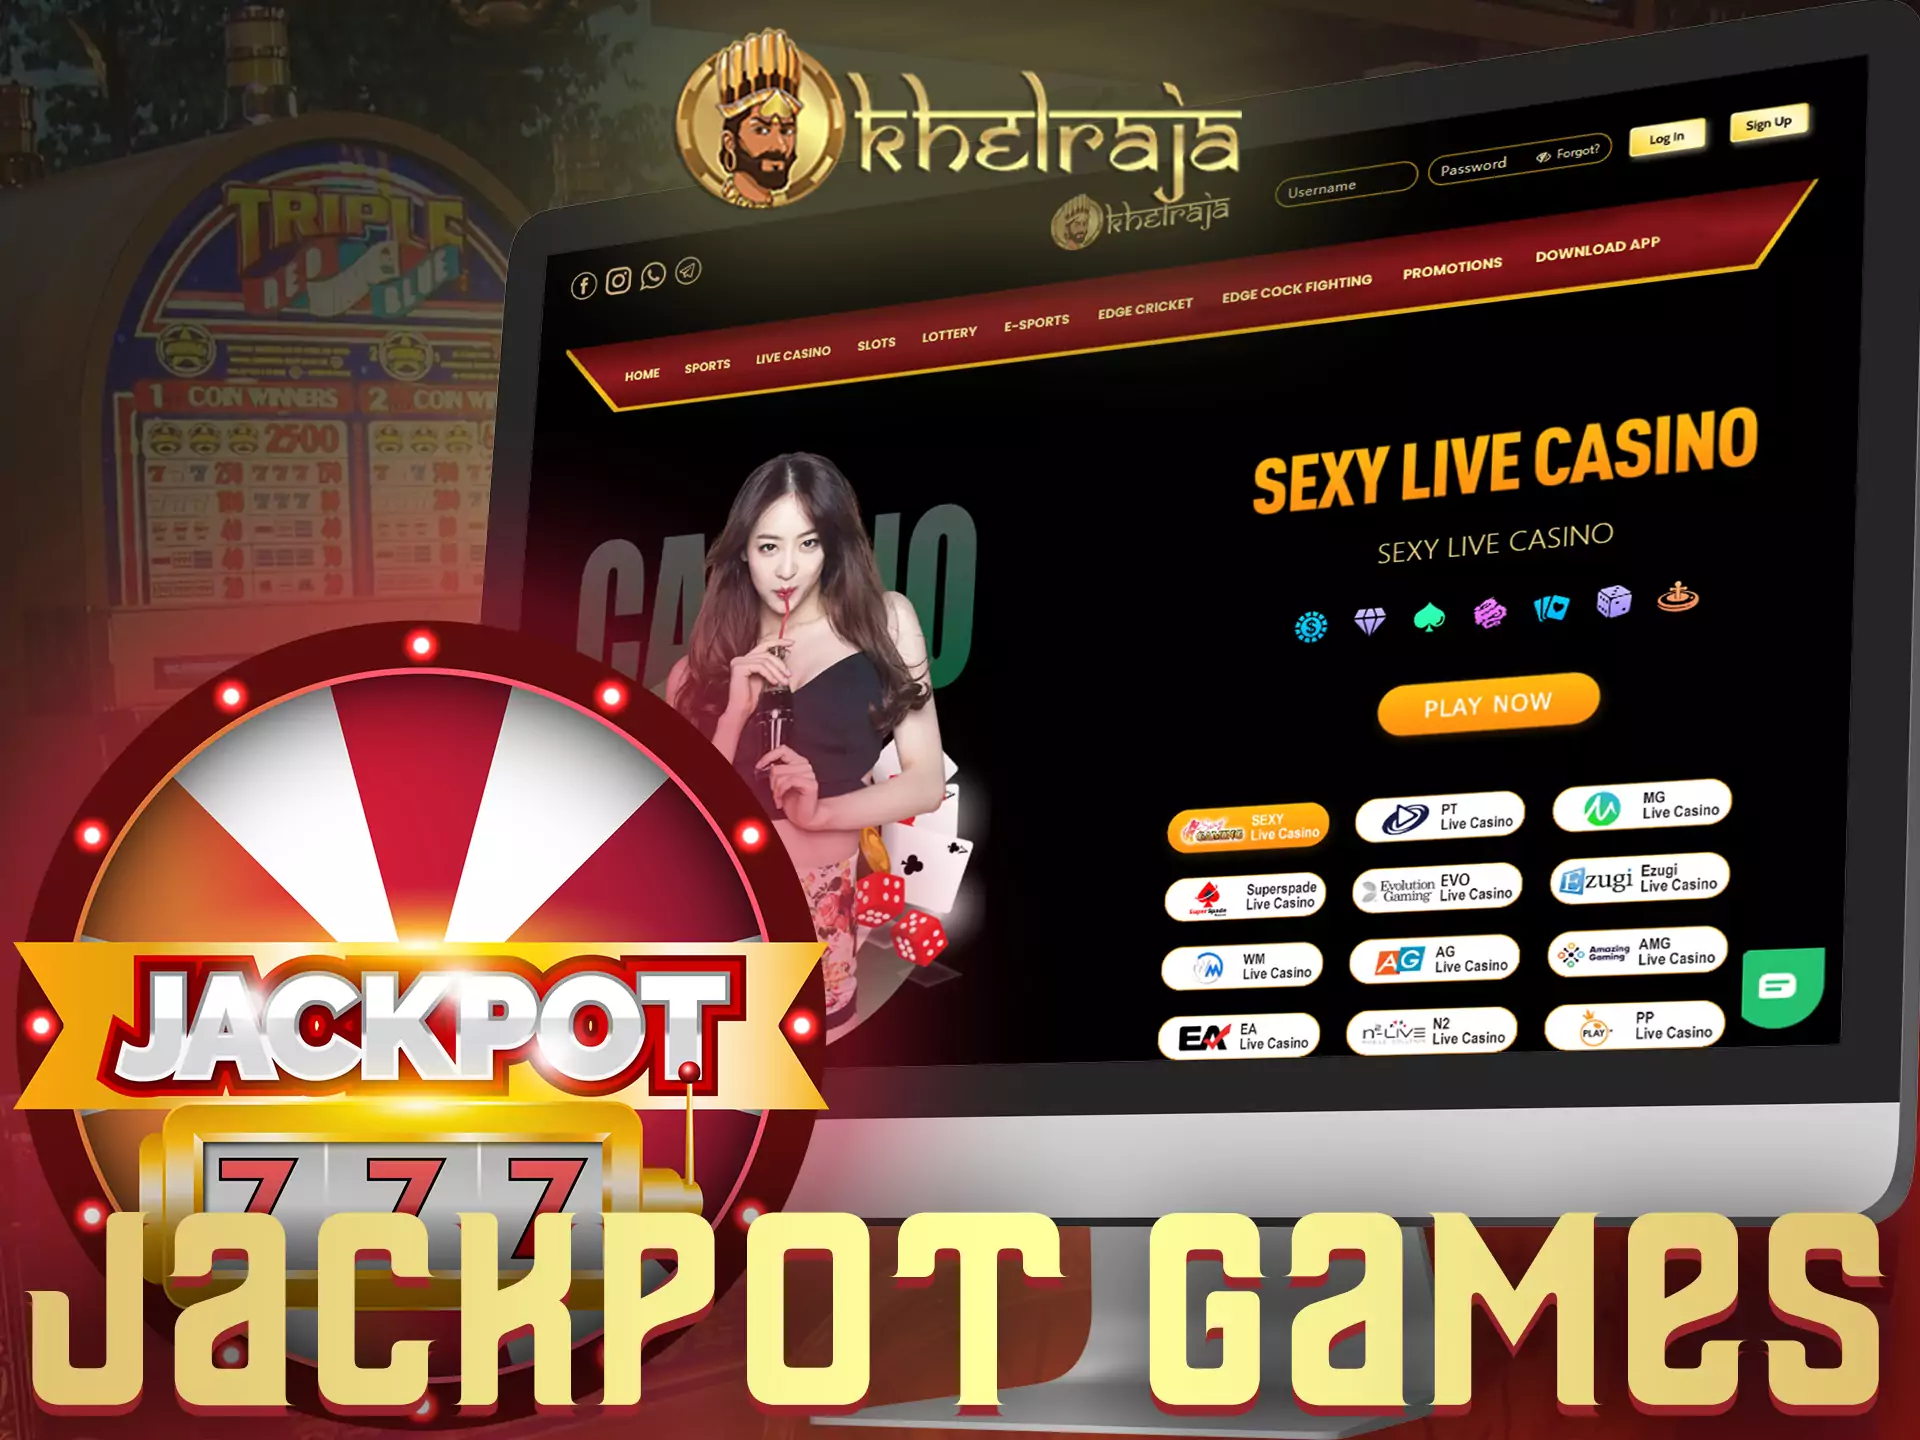 In the Khelraja Casino, you can win a fortune in a jackpot game.